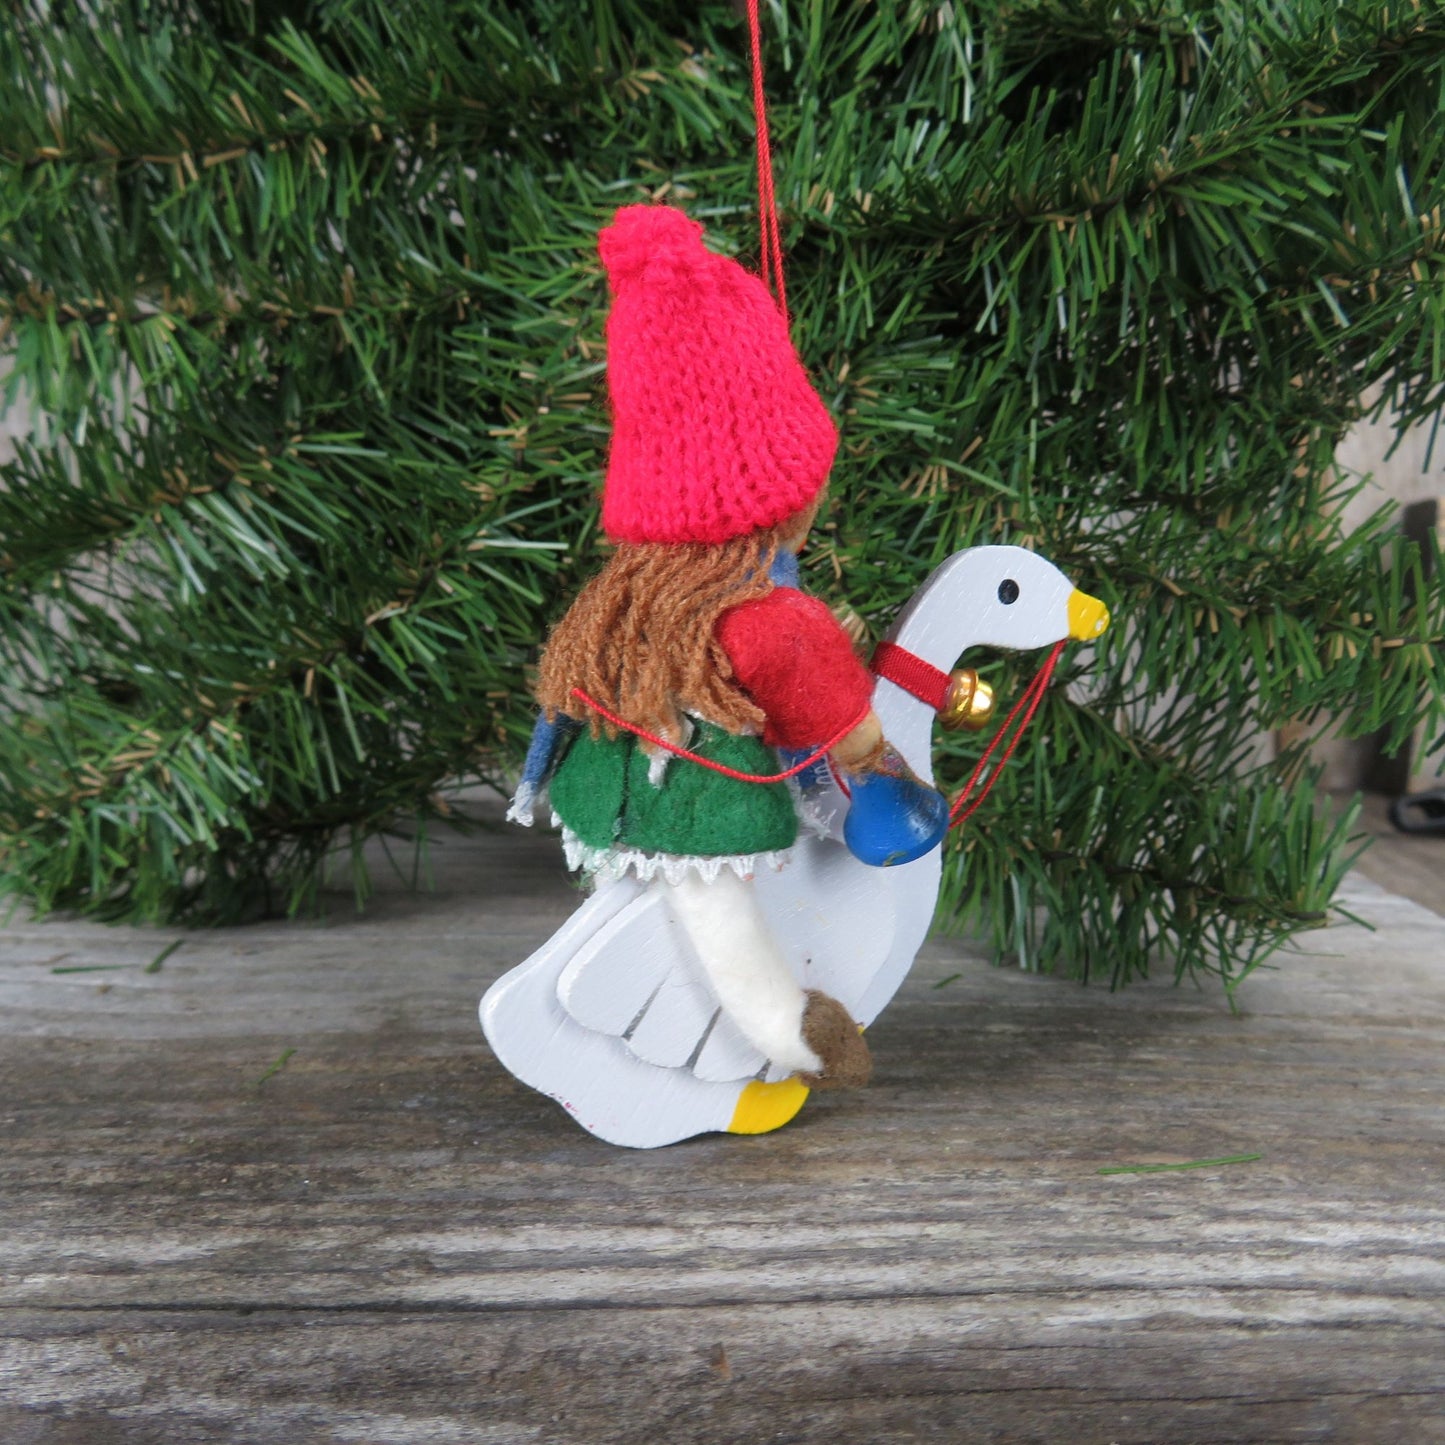 Girl Riding a Goose Wood Ornament Vintage Wooden White Bird with Girl Rider Christmas Ornament